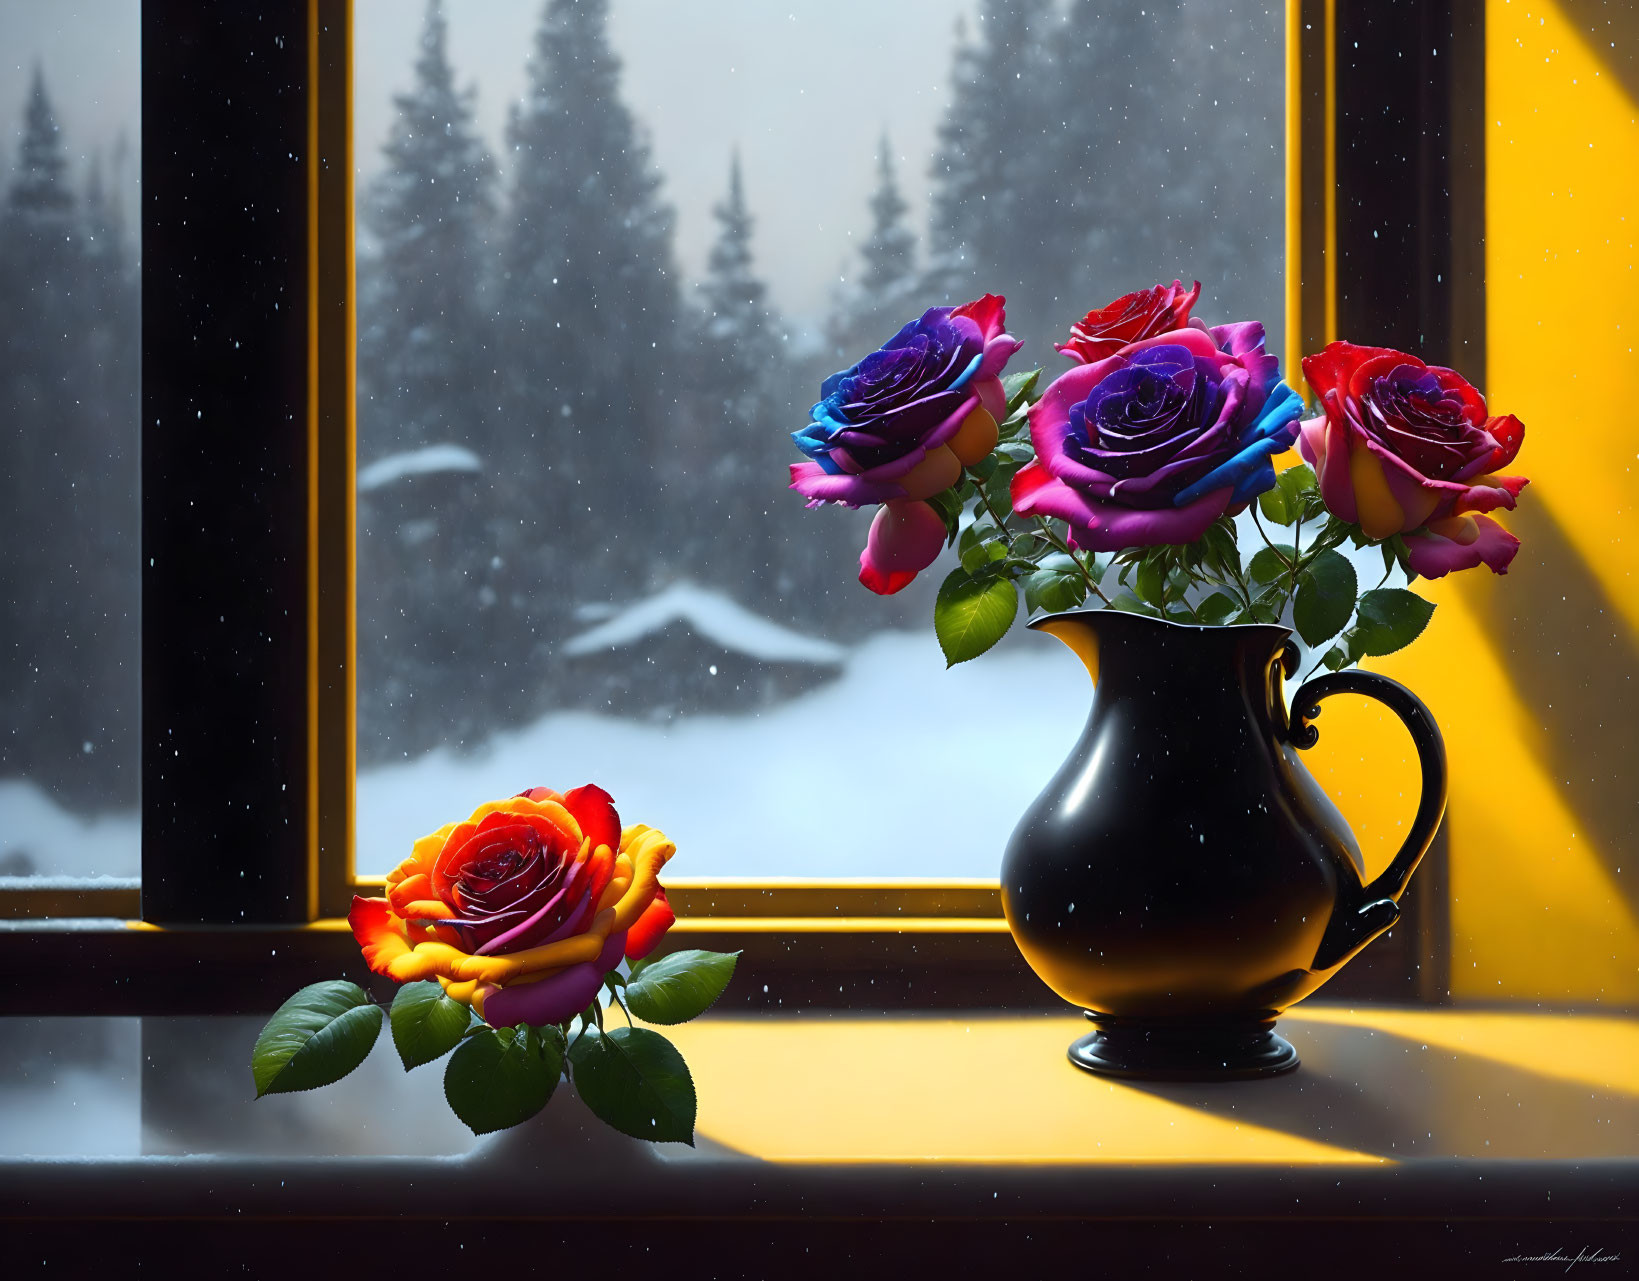 Multicolored roses in vase on snowy forest windowsill